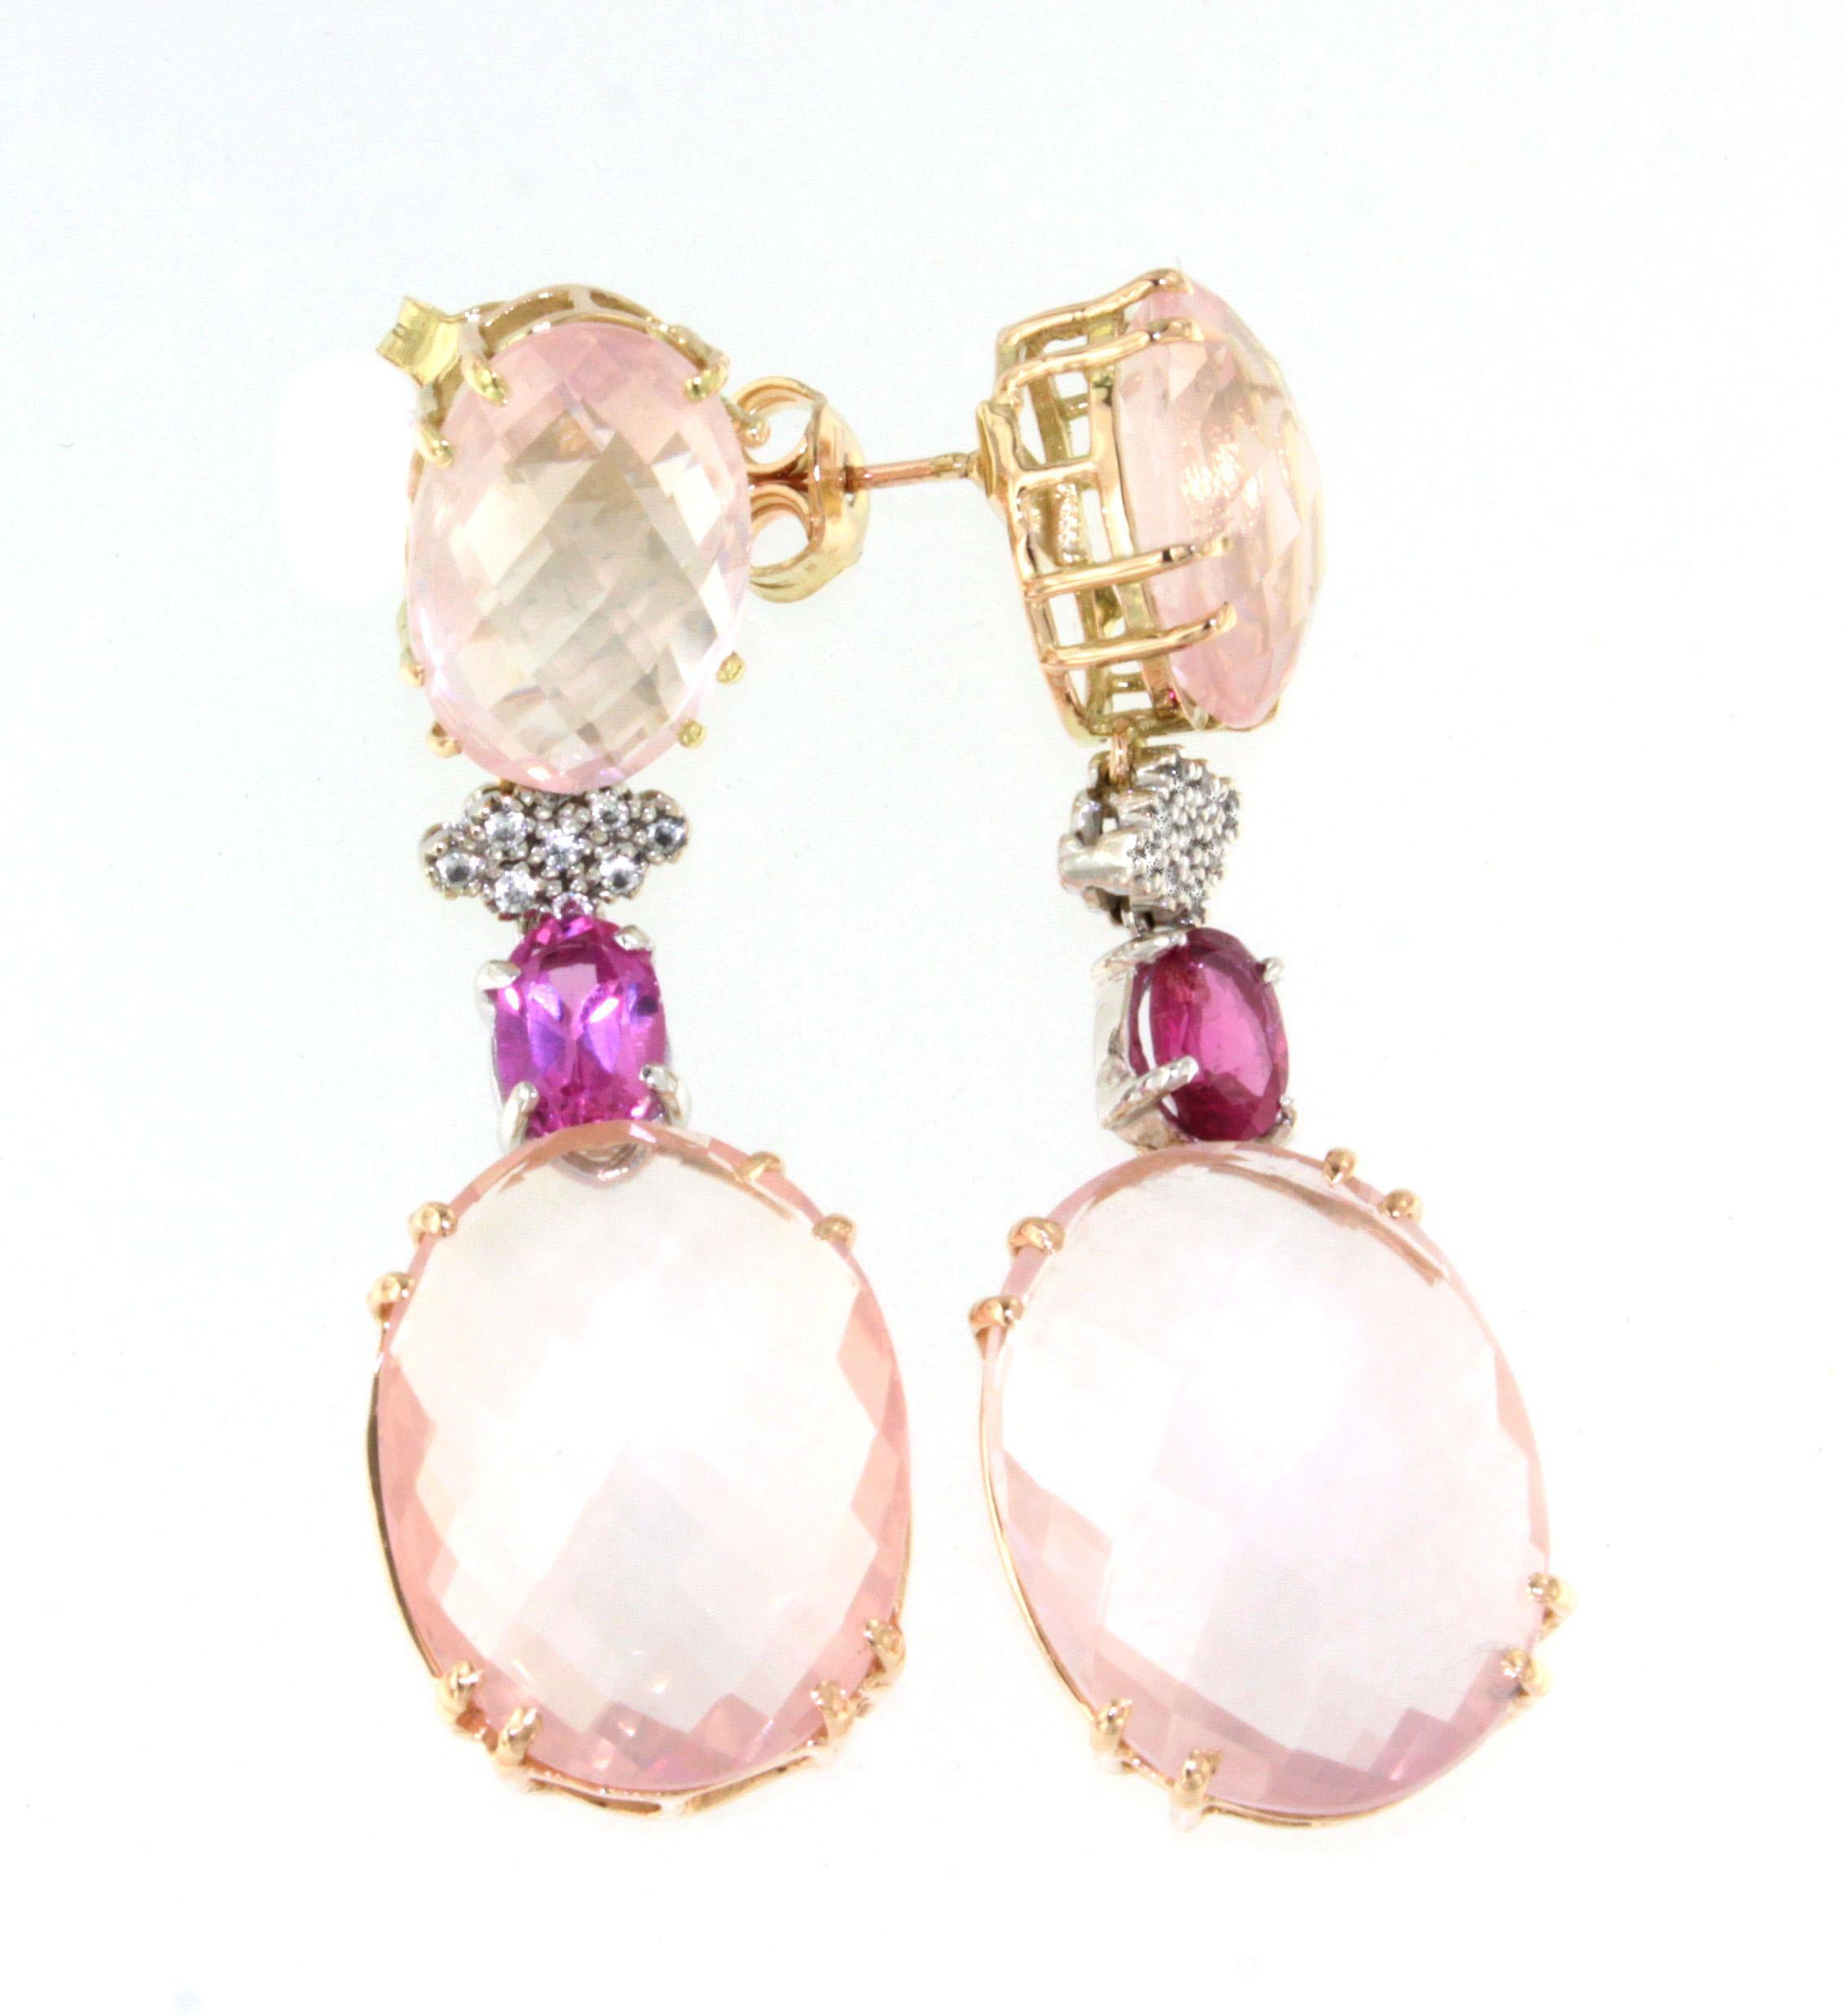 Contemporary 14kt 18Kt Rose Gold With Quartz Tourmaline White Diamonds Modern Pretty Earrings For Sale